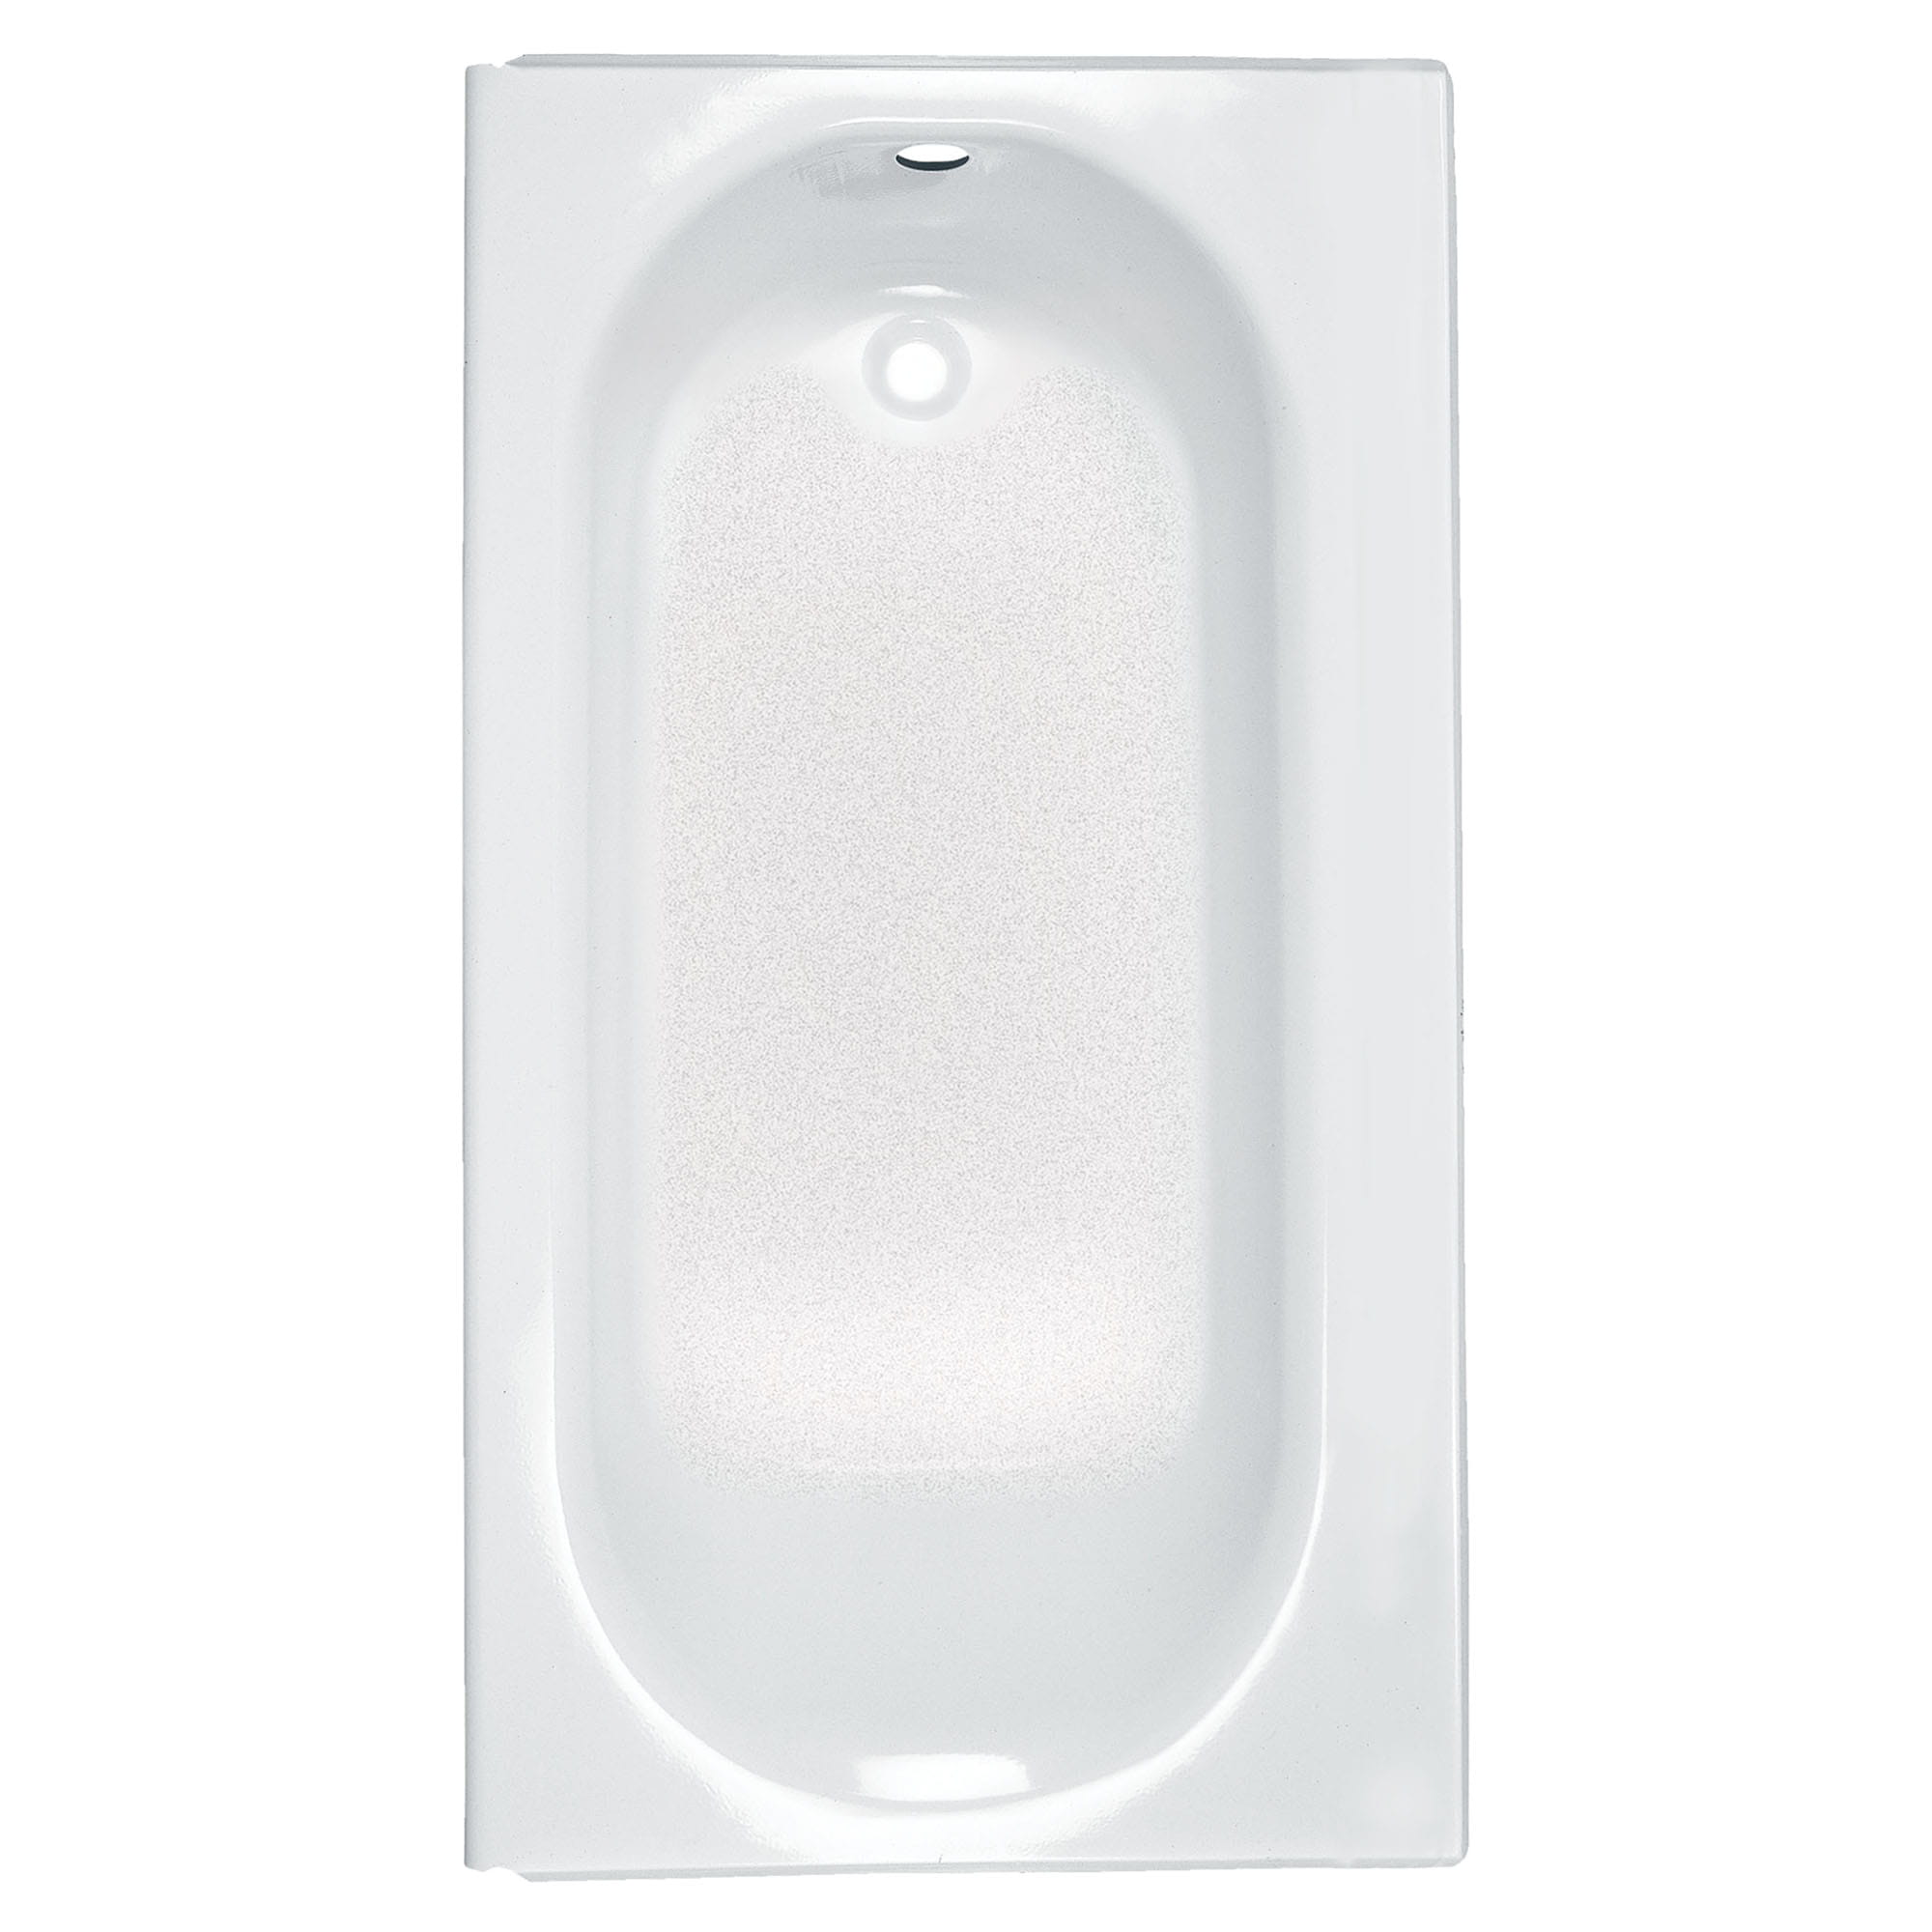 Princeton Americast 60 x 34 Inch Integral Apron Bathtub Left Hand Outlet With Luxury Ledge ARCTIC